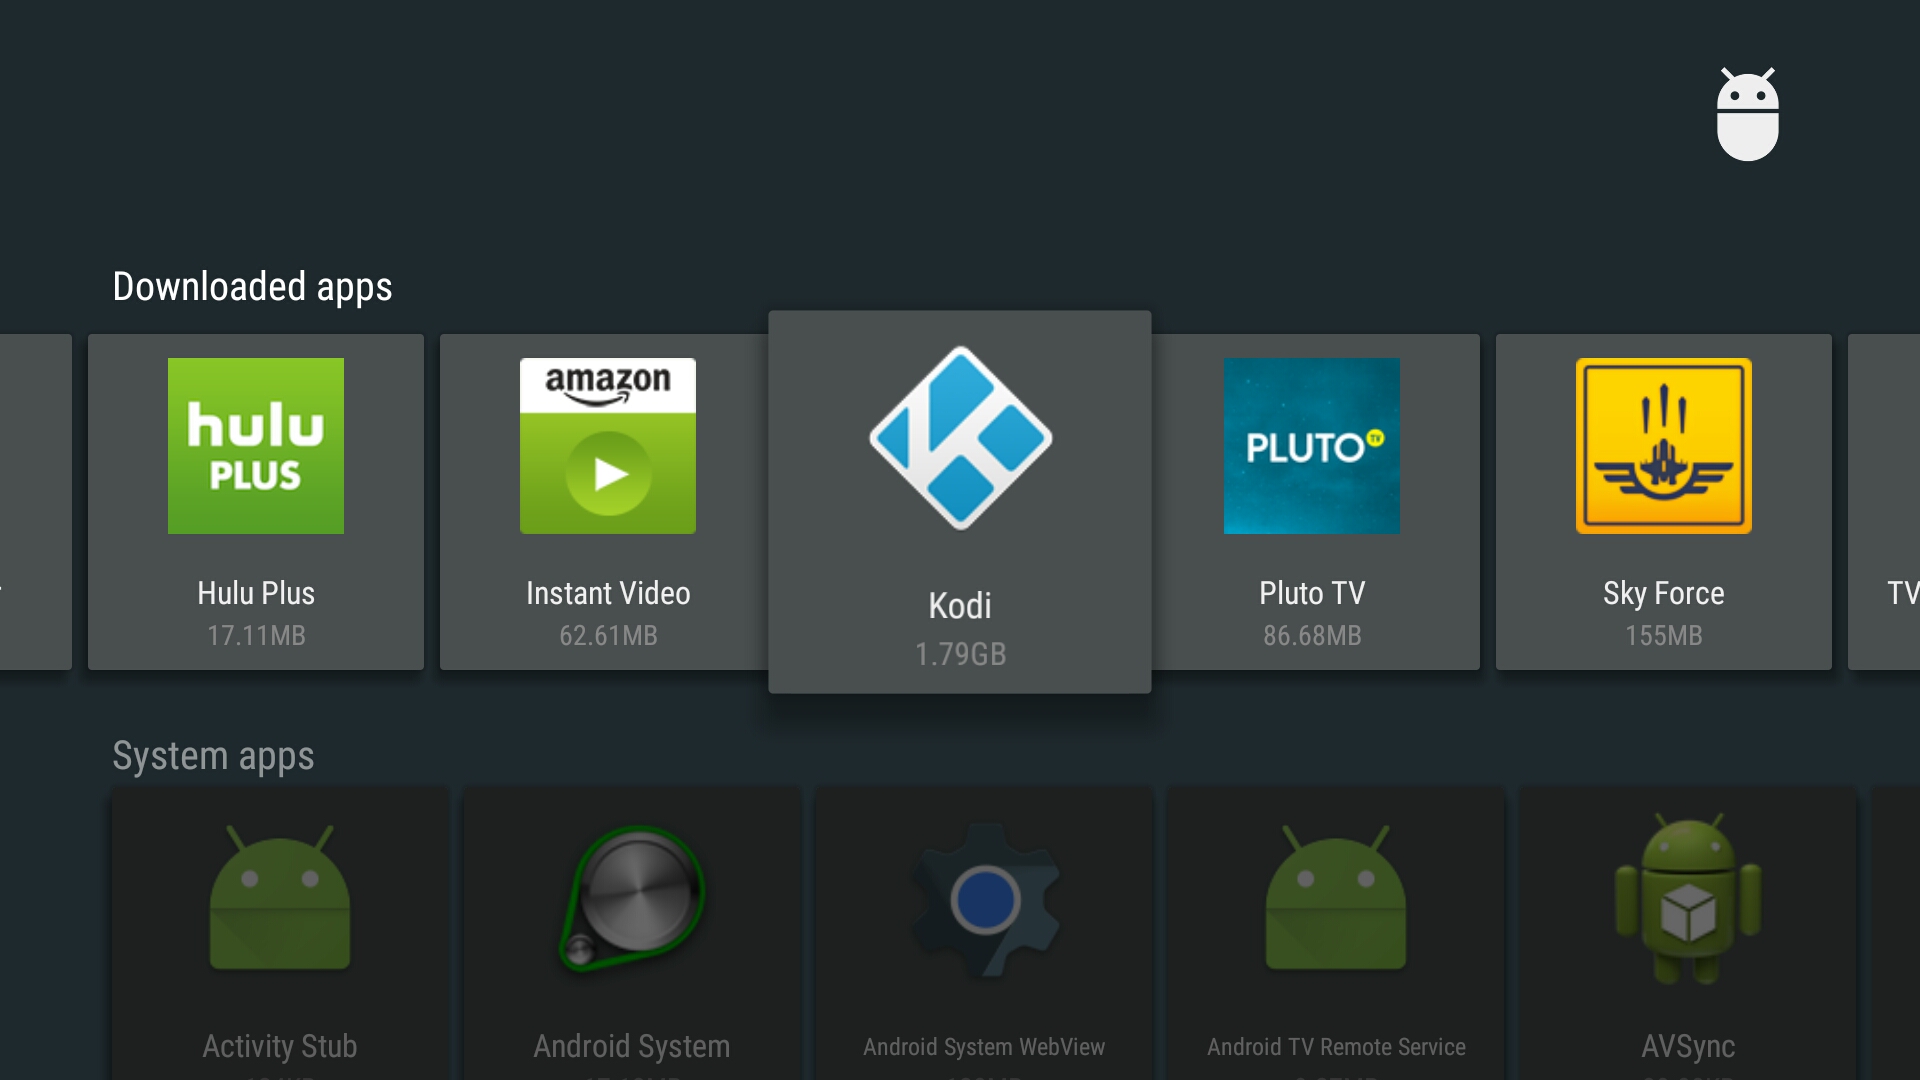 Step 2: Go to the Downloaded apps then select Kodi.